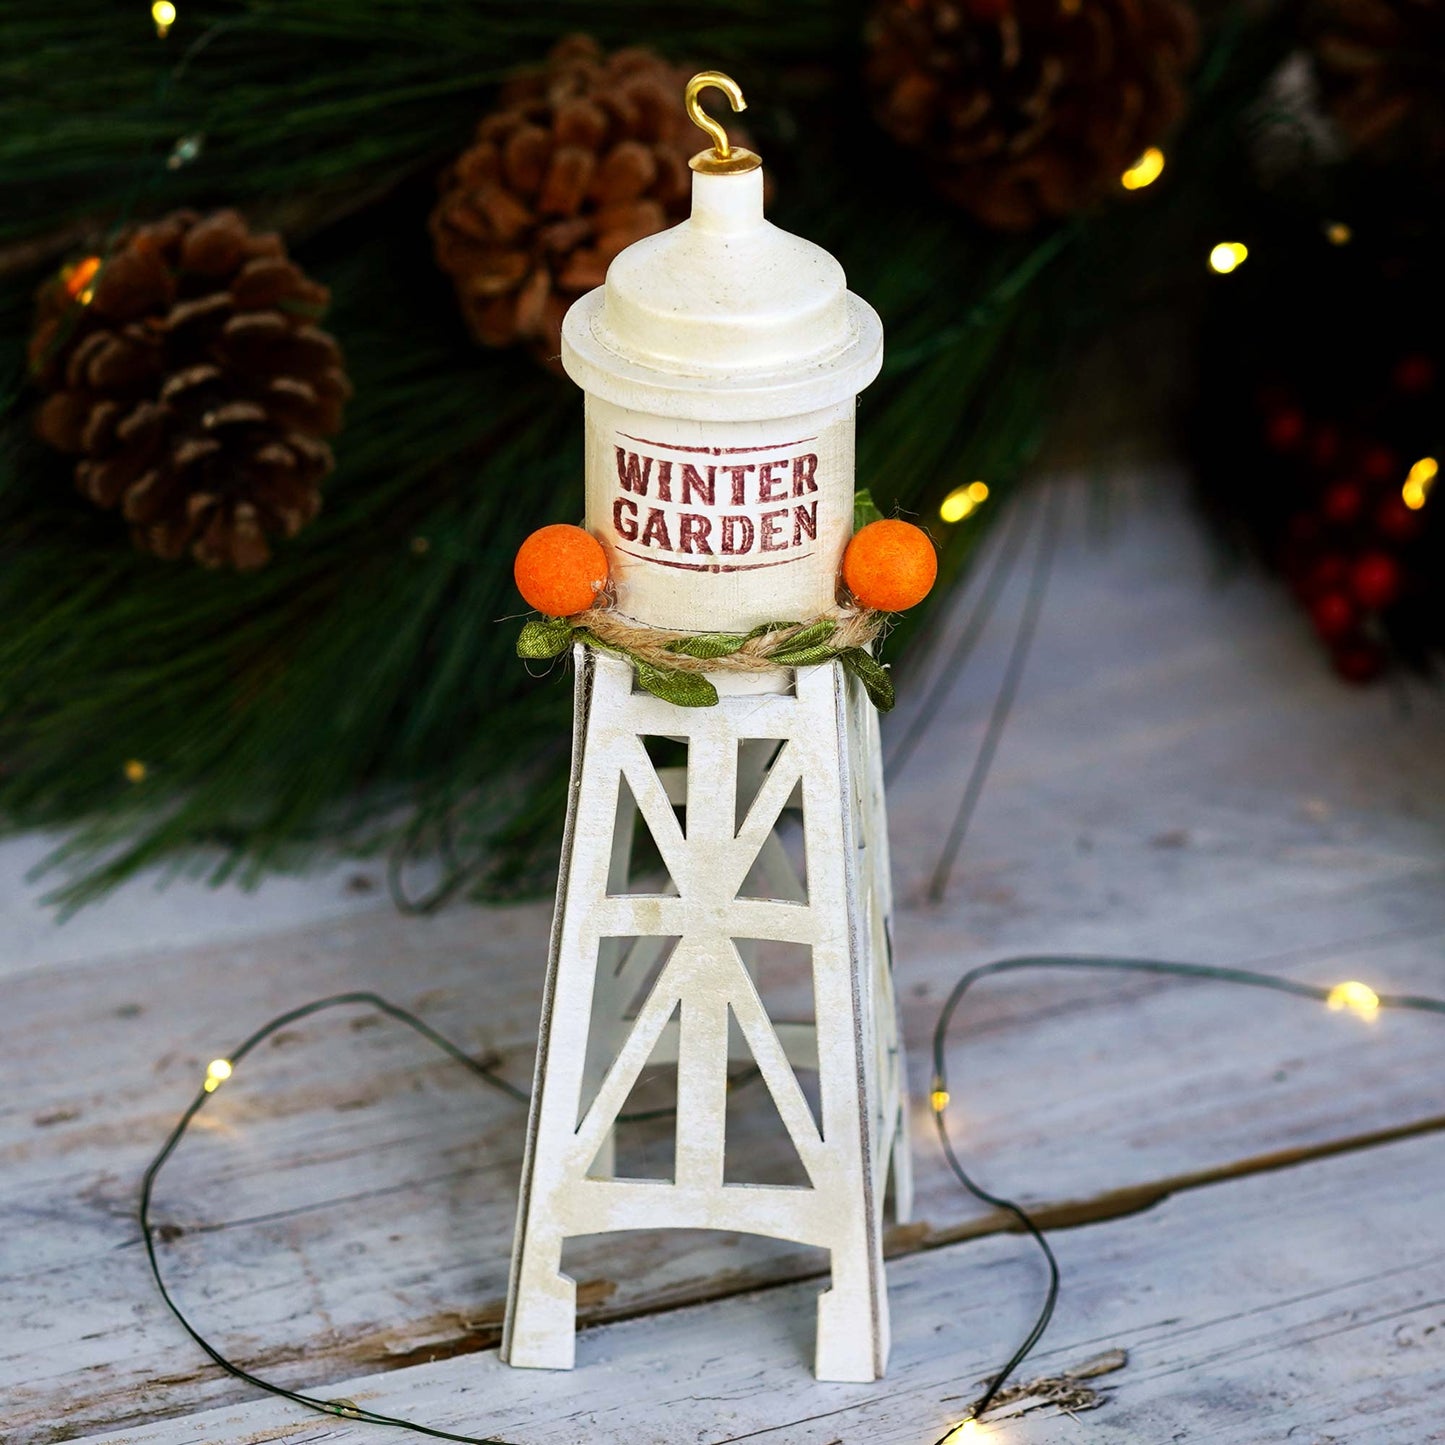 Handmade Winter Garden Water Tower Holiday Ornament 2021 - Limited Edition